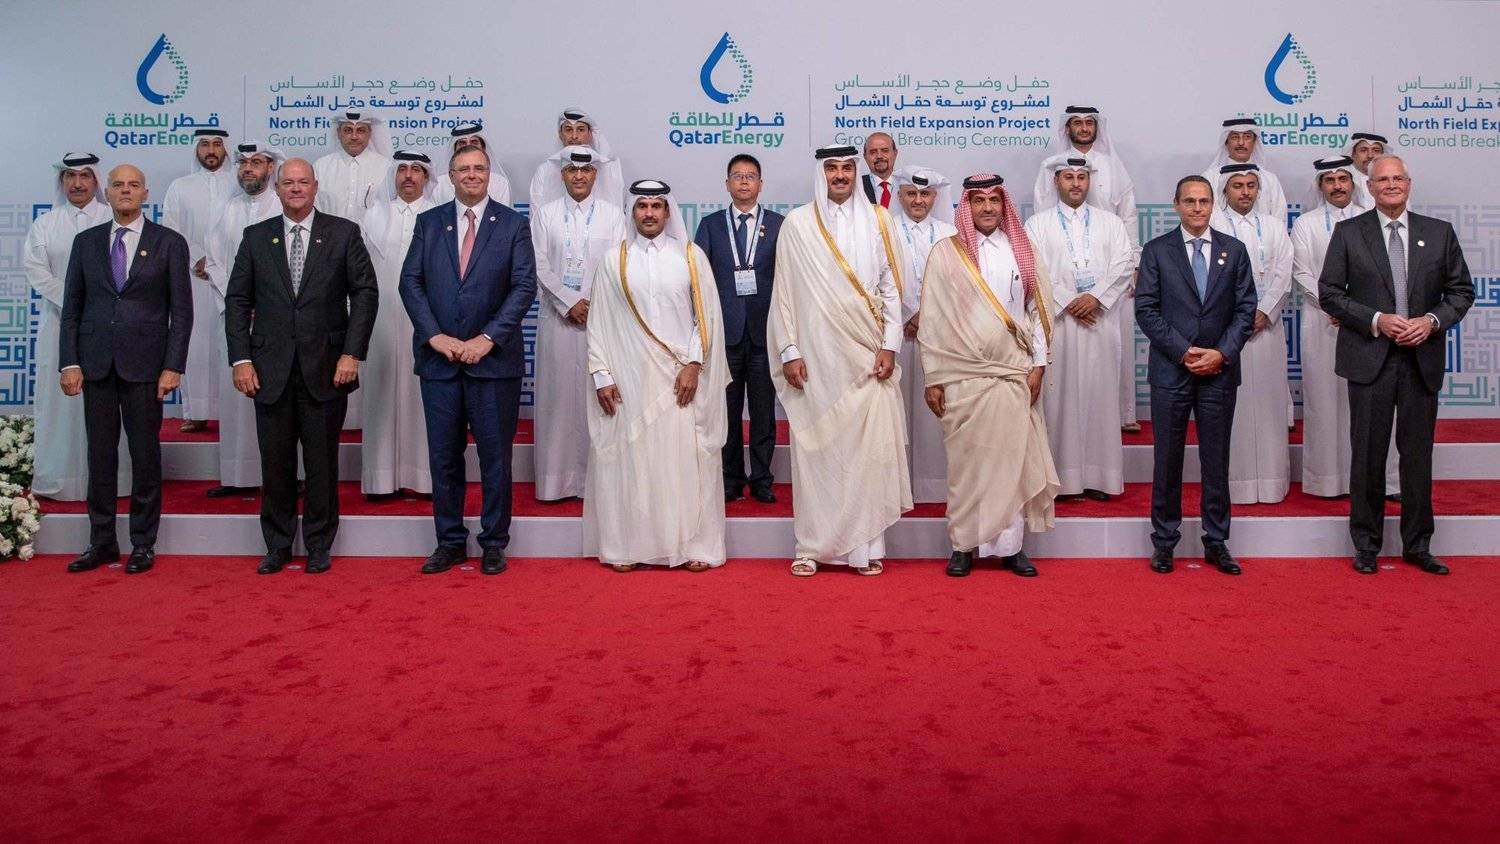 Emir of Qatar Sheikh Tamim bin Hamad Al Thani and officials during the ceremony to lay the foundation stone for the North Field gas expansion project. (X platform)